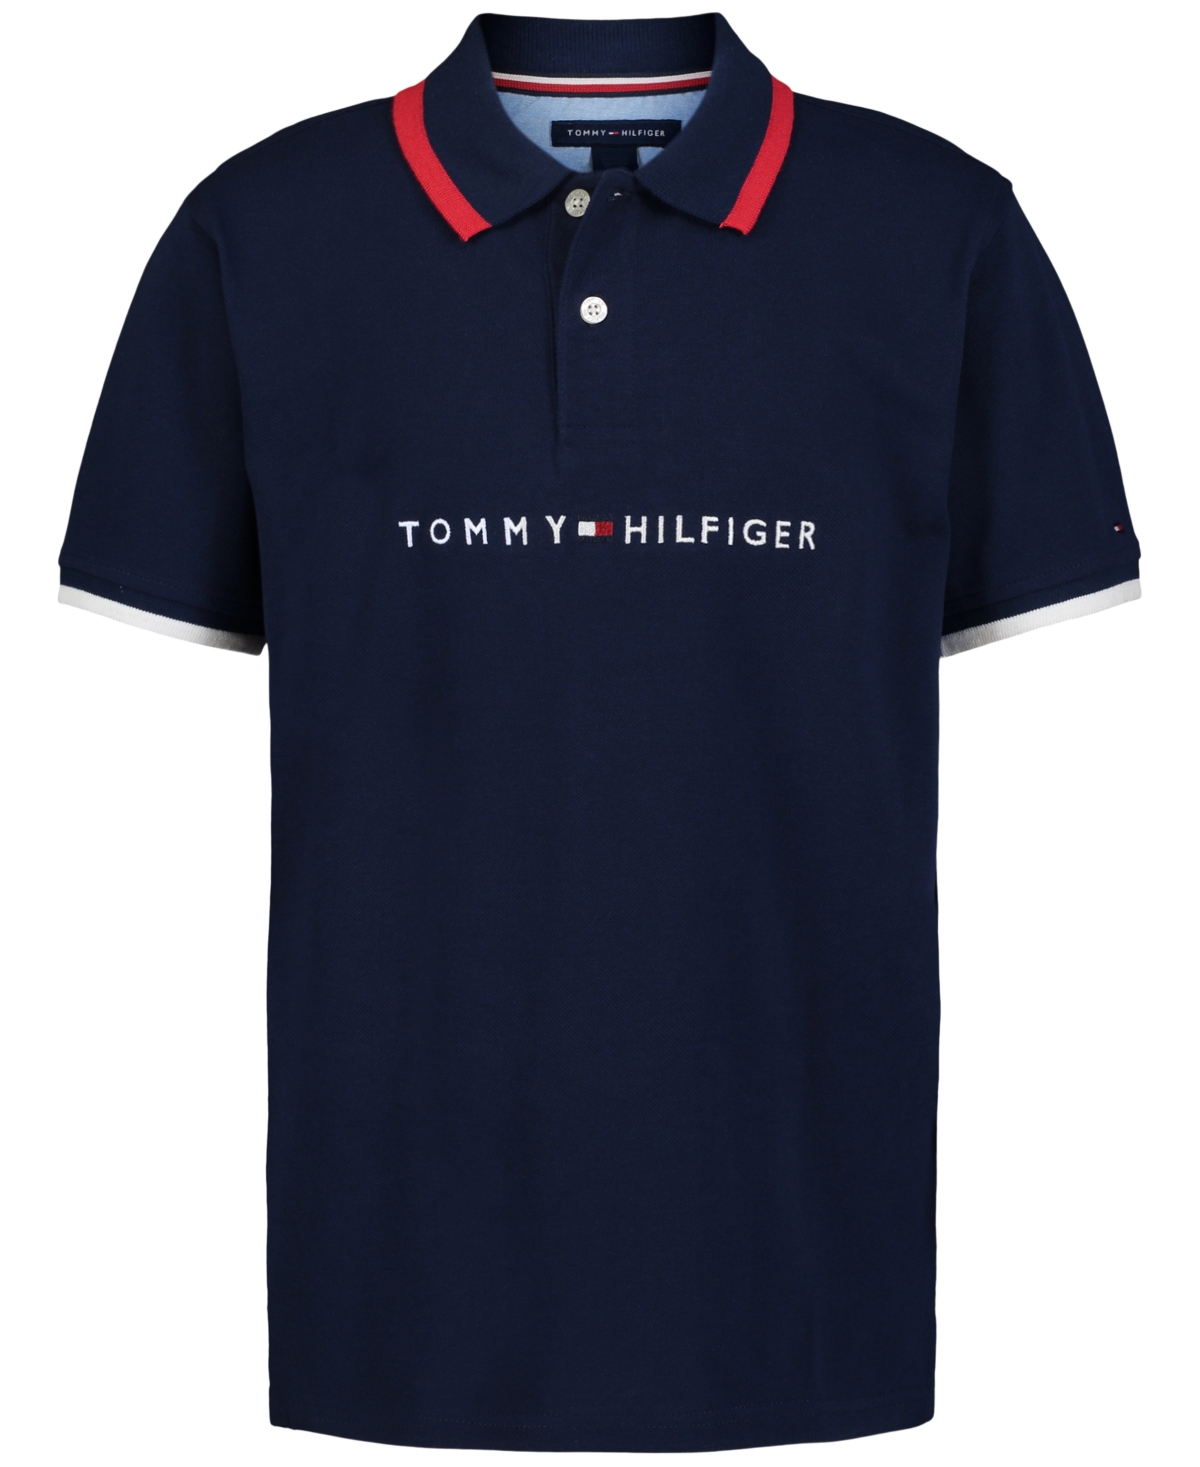 Tommy Hilfiger Kids' Little Boys Tomas Embroidered Logo Polo Shirt In Navy Blaze